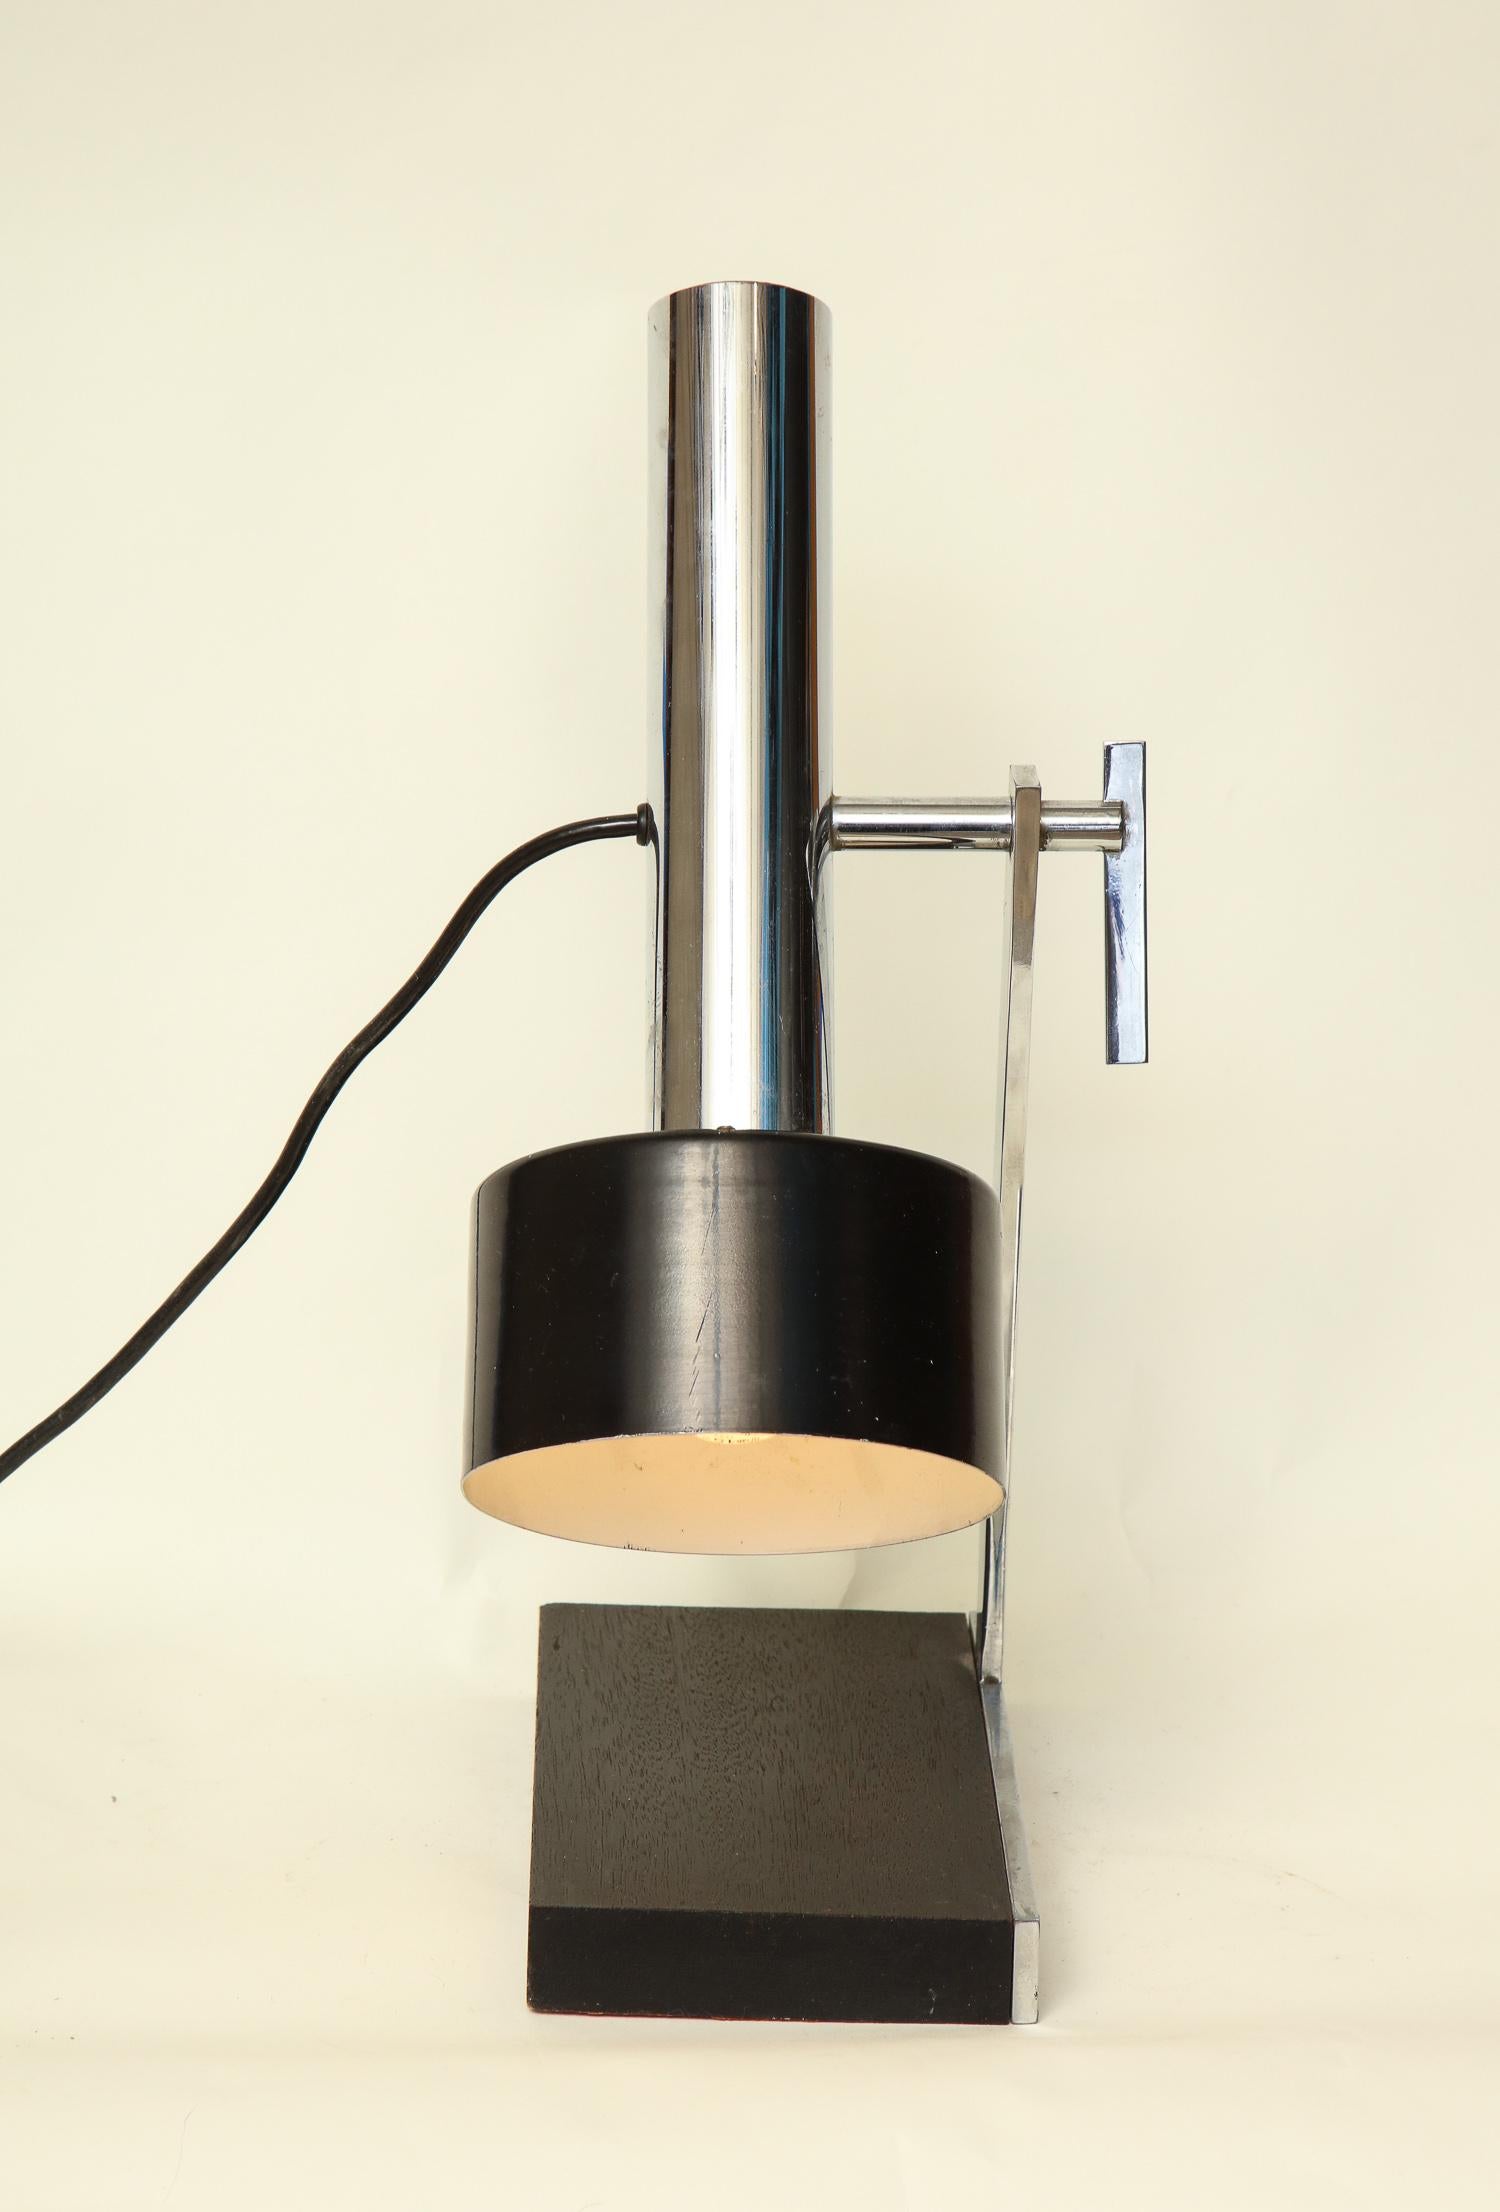 Metal Articulated Table Lamp Architectural Mid-Century Modern shade adjusts Italy 1950 For Sale